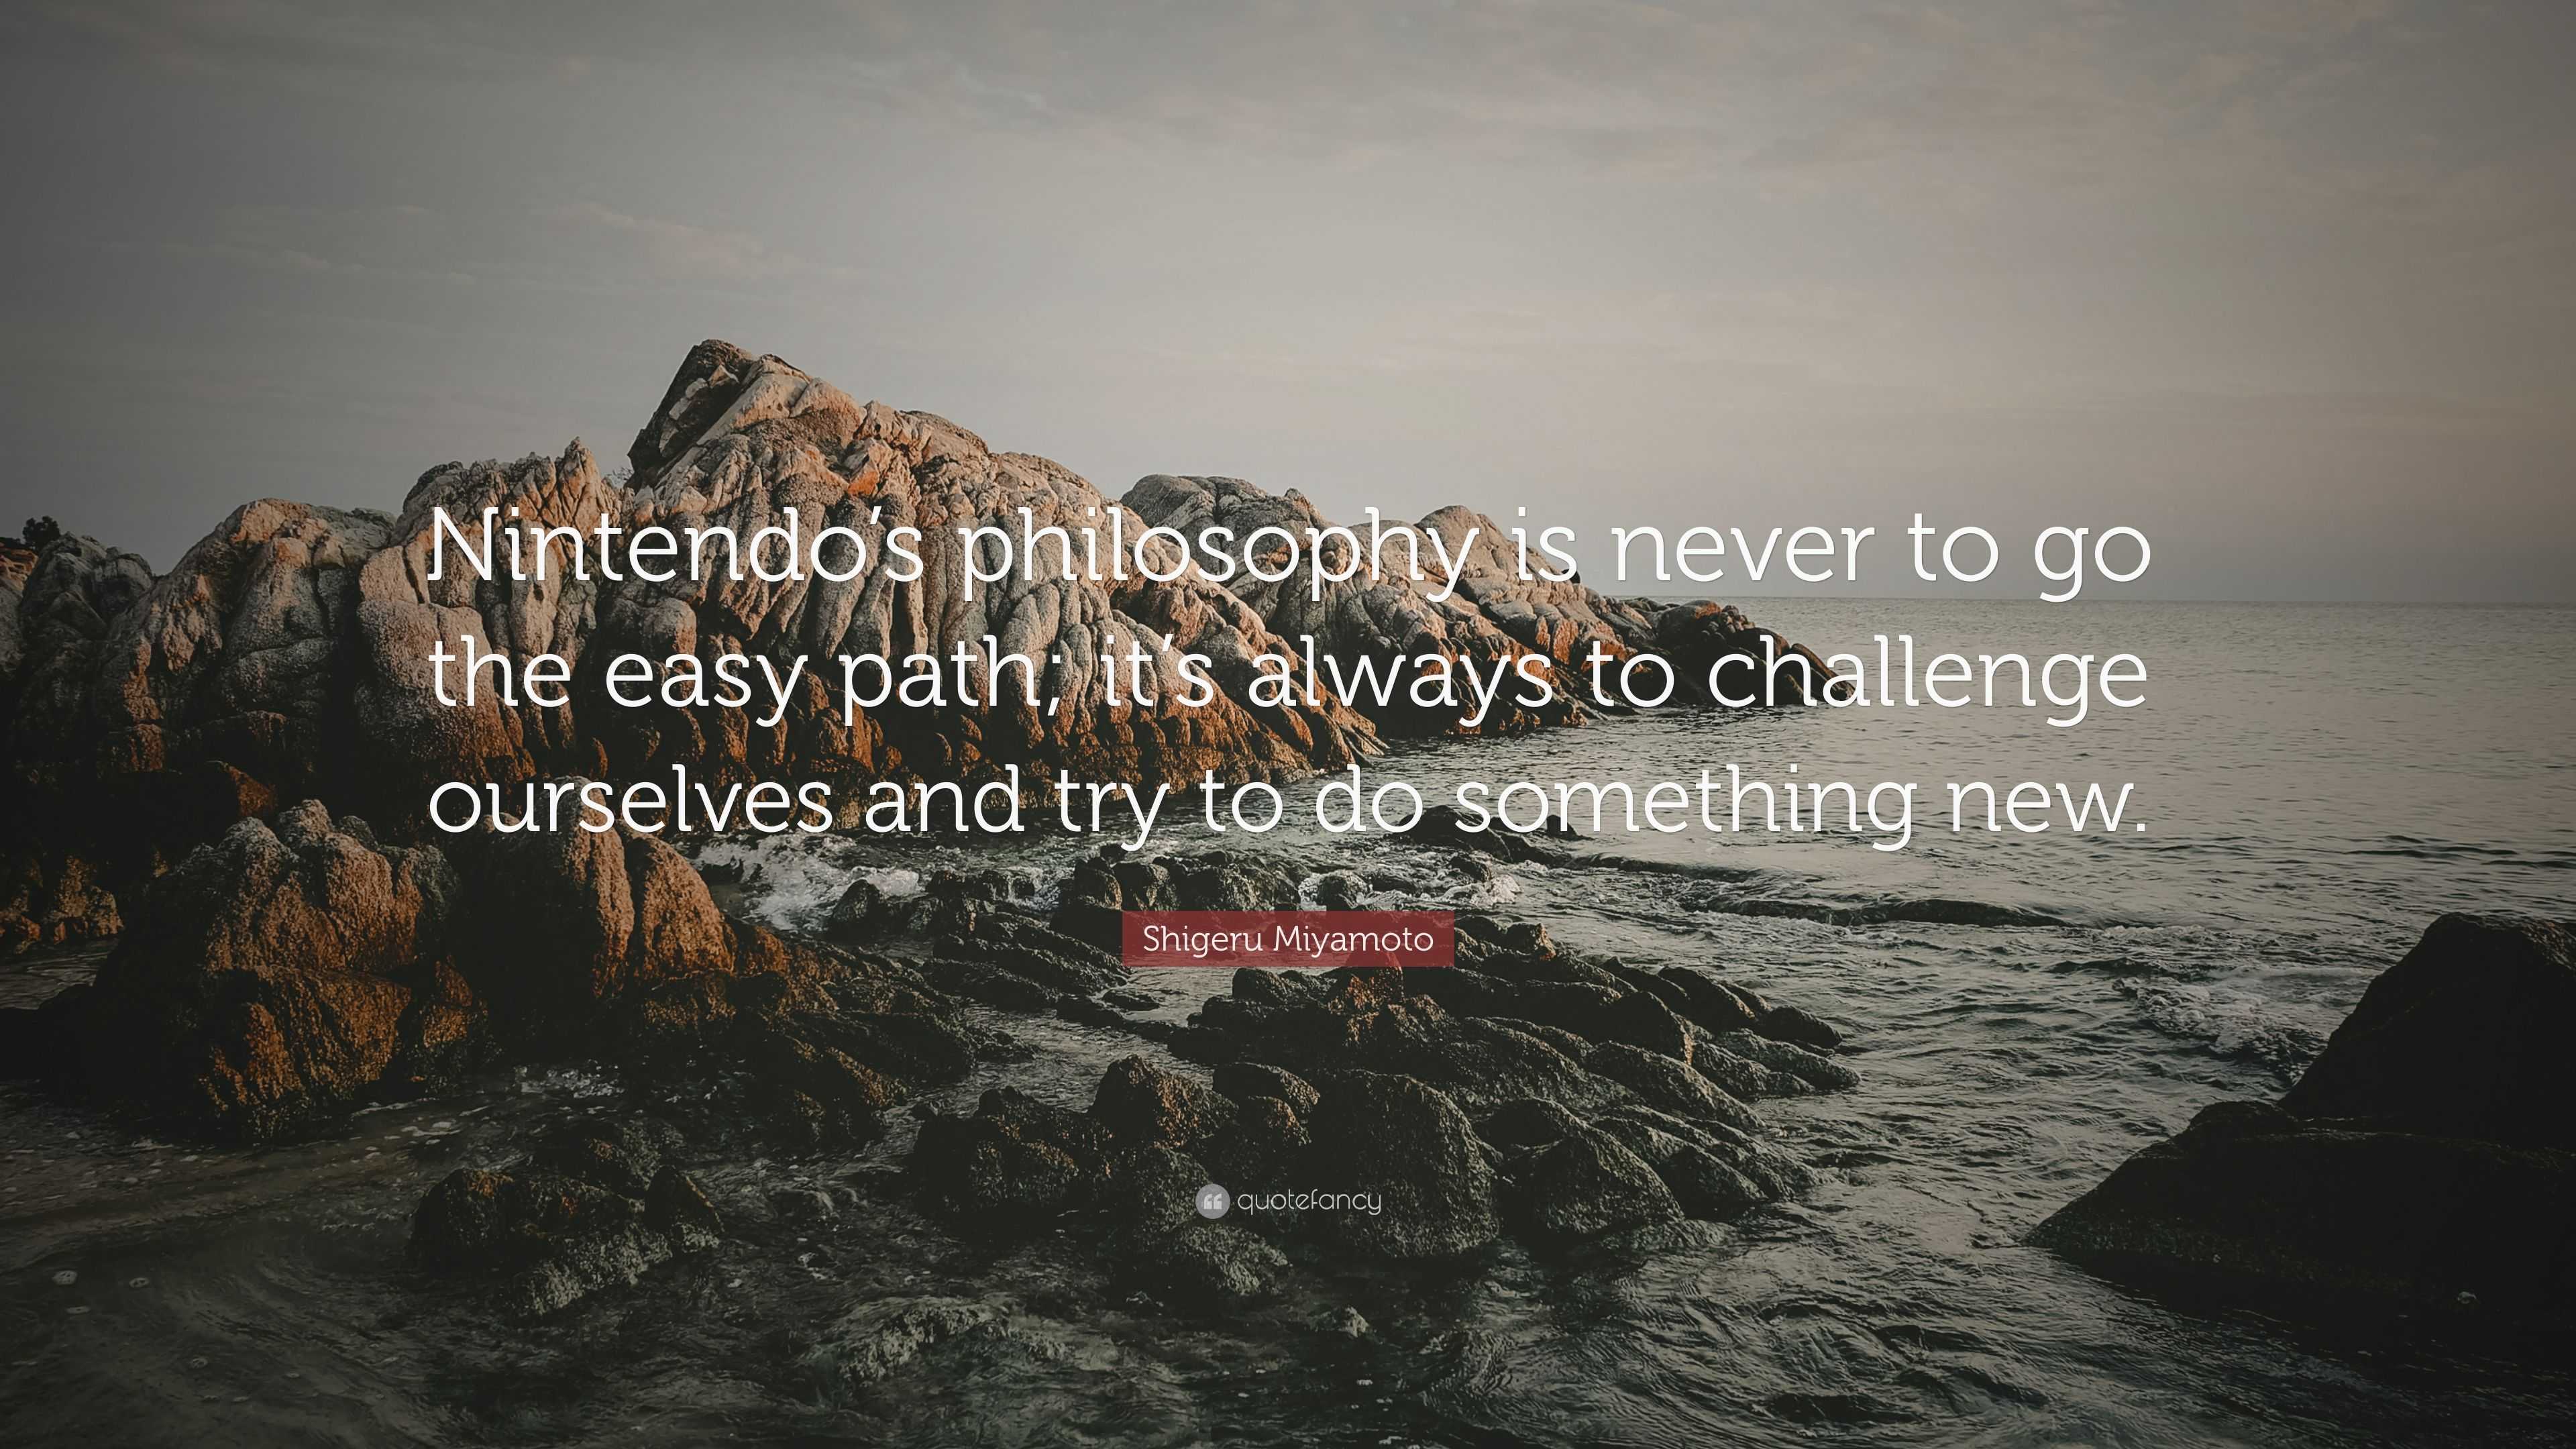 Shigeru Miyamoto never said his most famous quote reveals new research